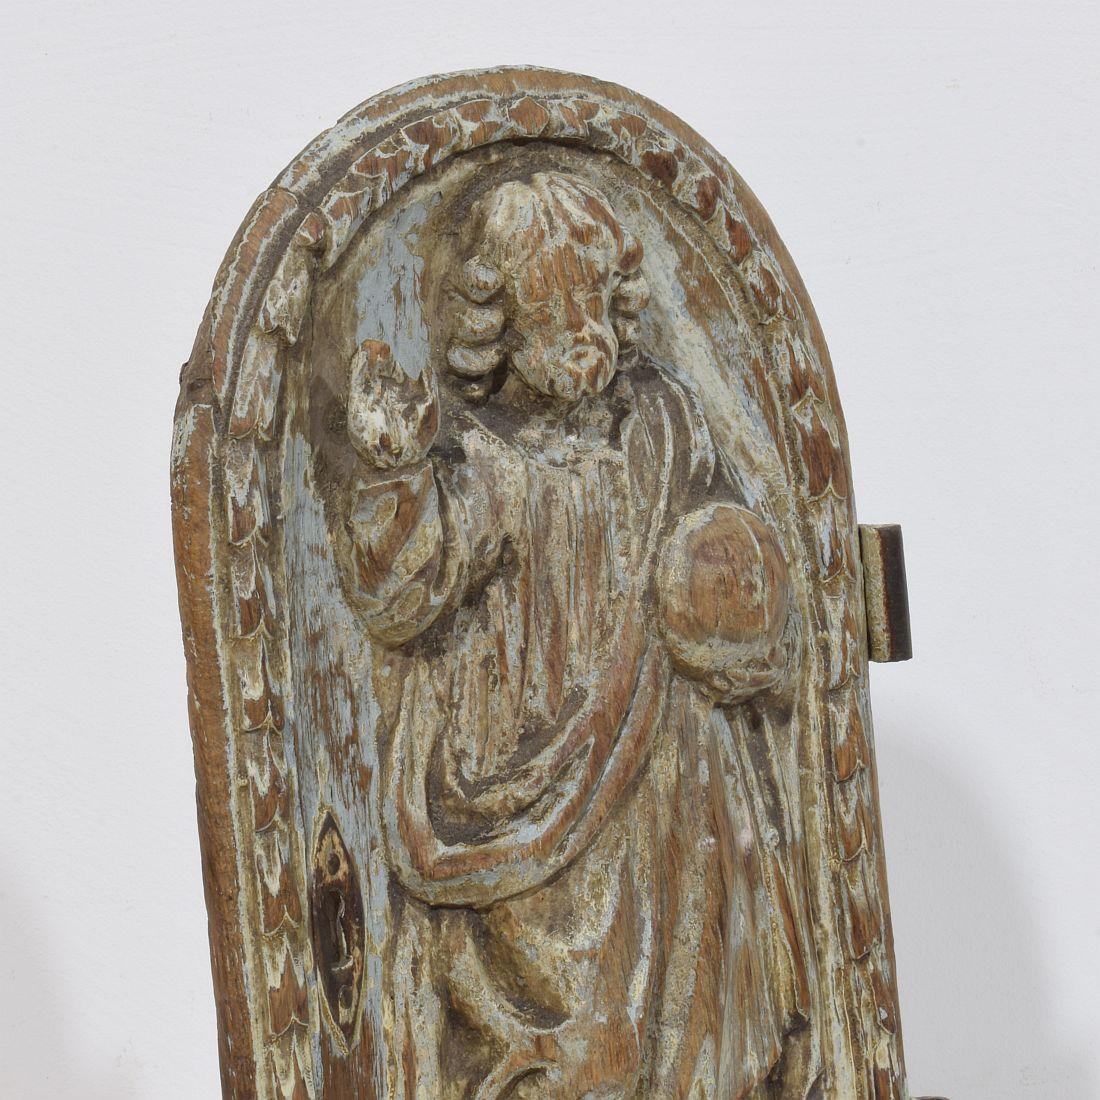 French 18th Century Wooden Tabernacle Door Depicting Christ / Salvator Mundi For Sale 2